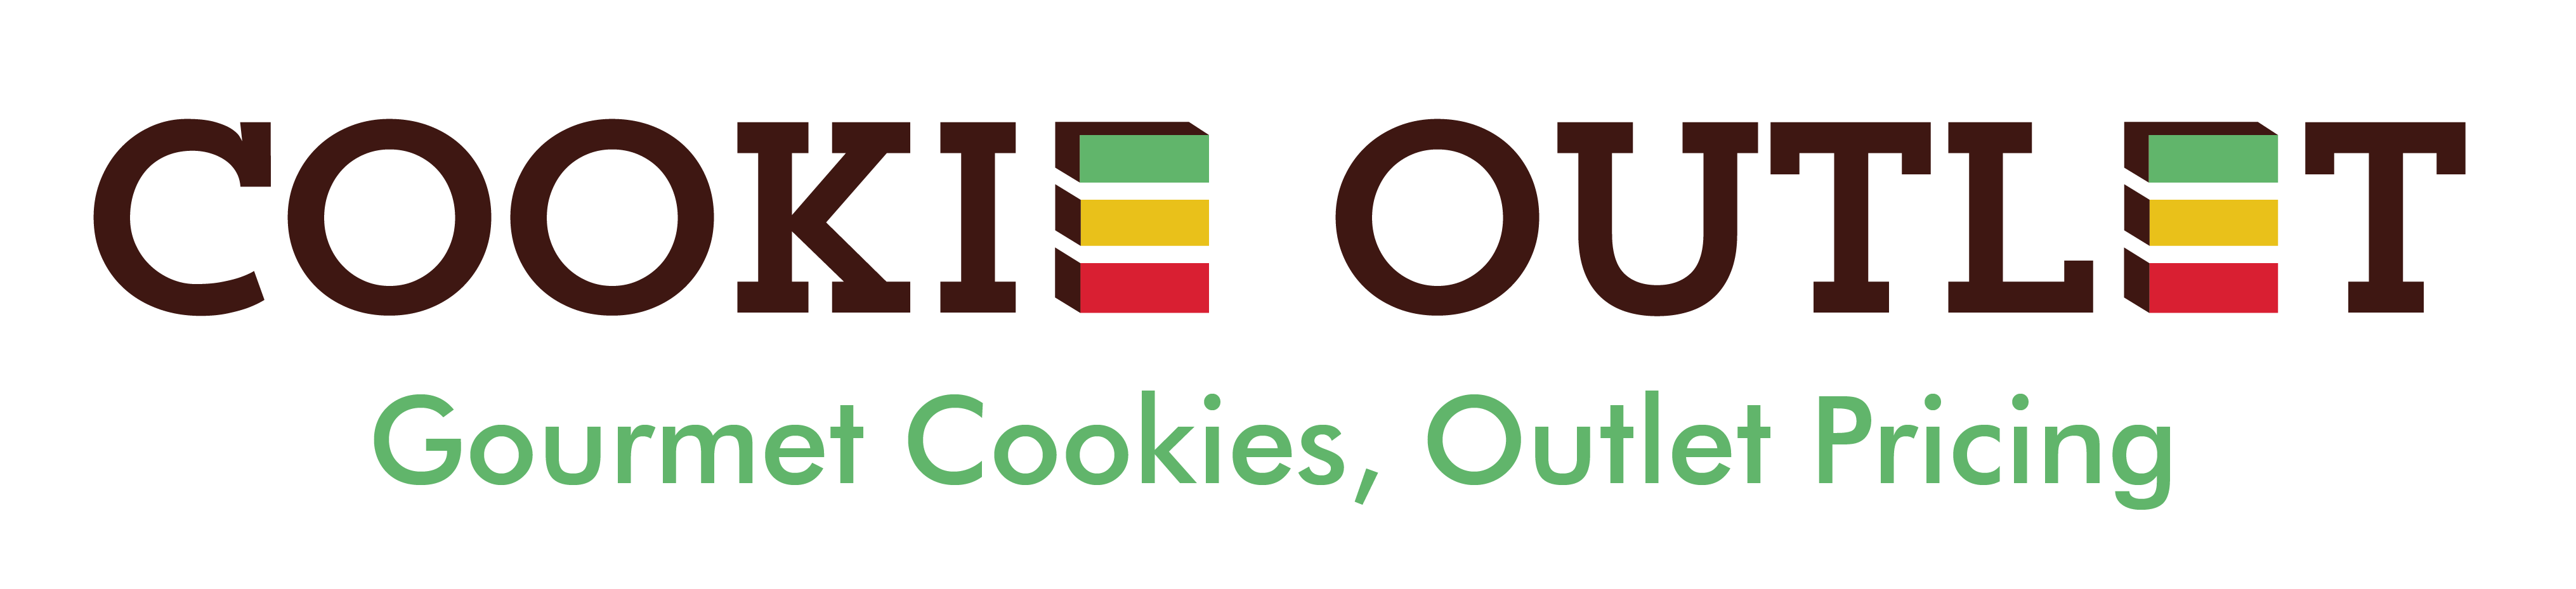 The Cookies Outlet